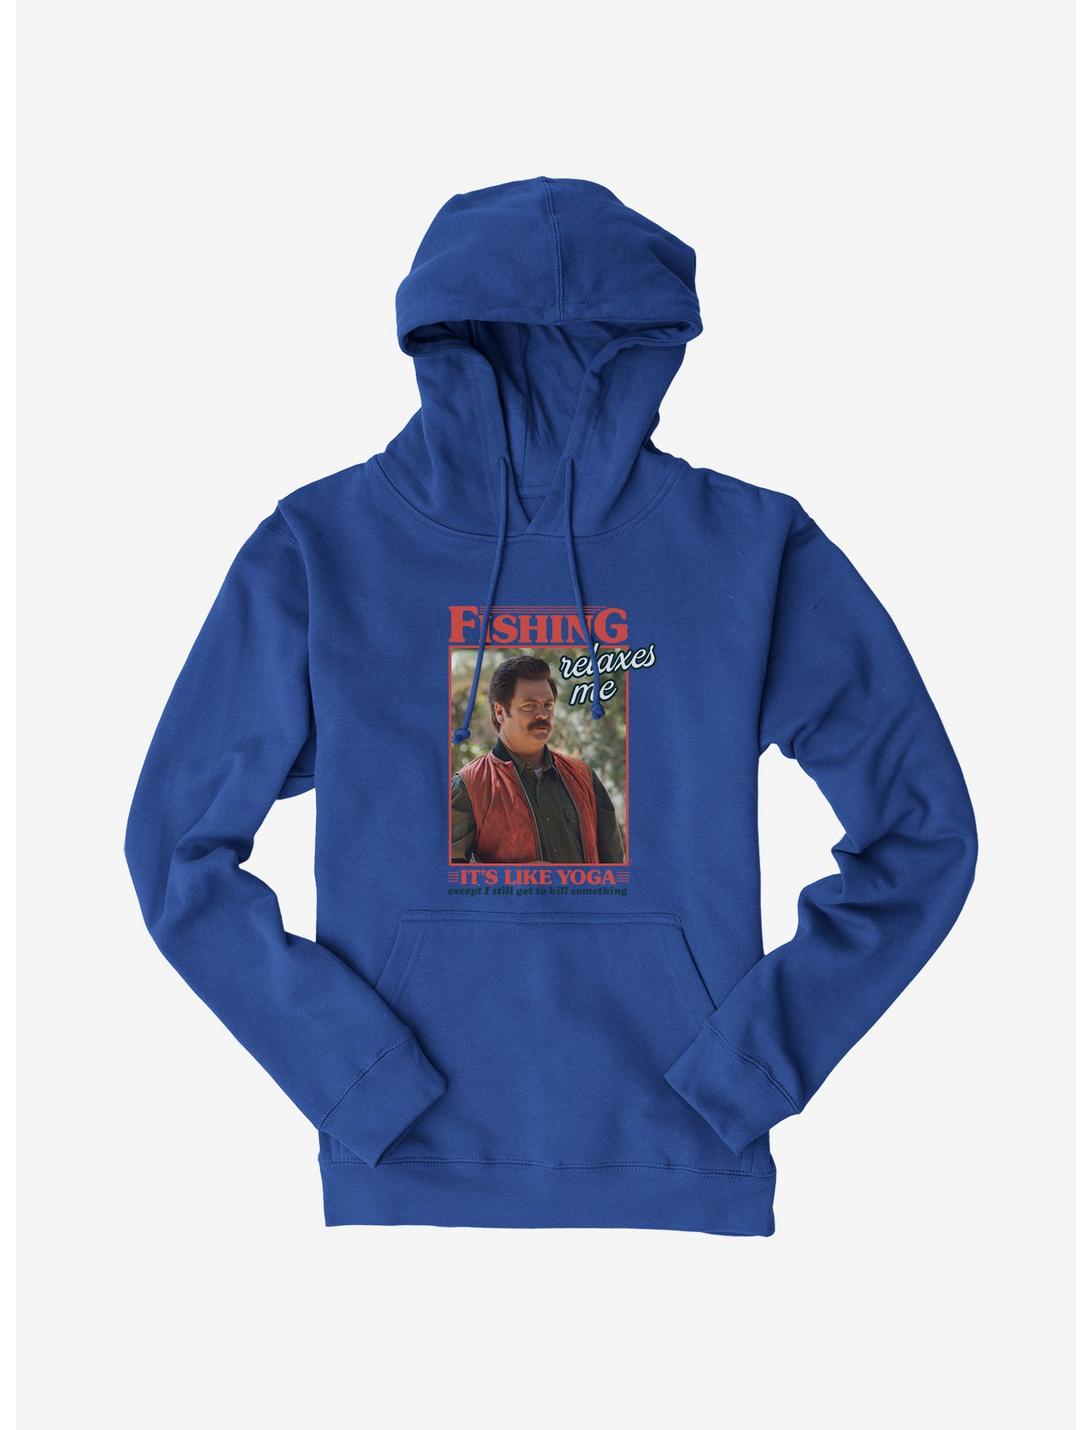 Parks And Recreation Fishing Like Yoga Hoodie, , hi-res